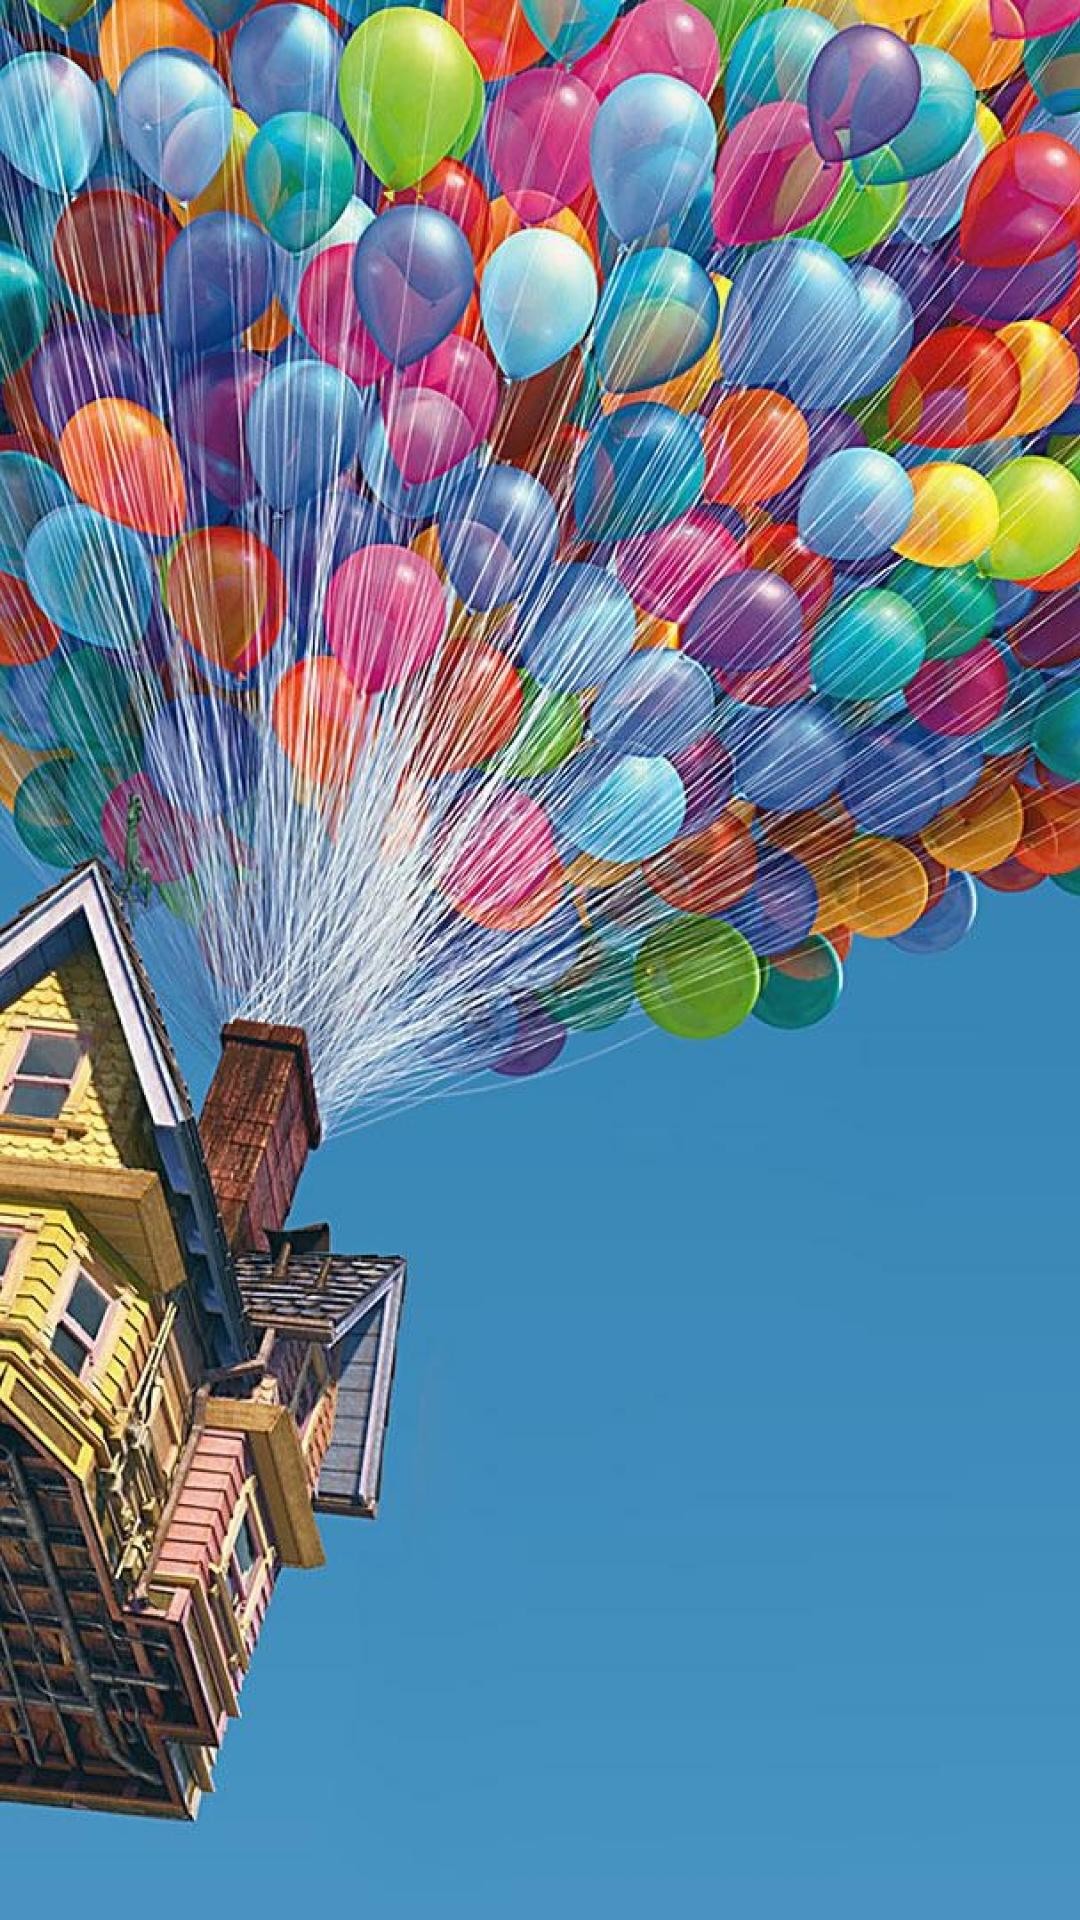 1080x1920 free wallpaper for galaxy s5 Up movie balloons wallpapers for galaxy s5 The best  wallpapers for